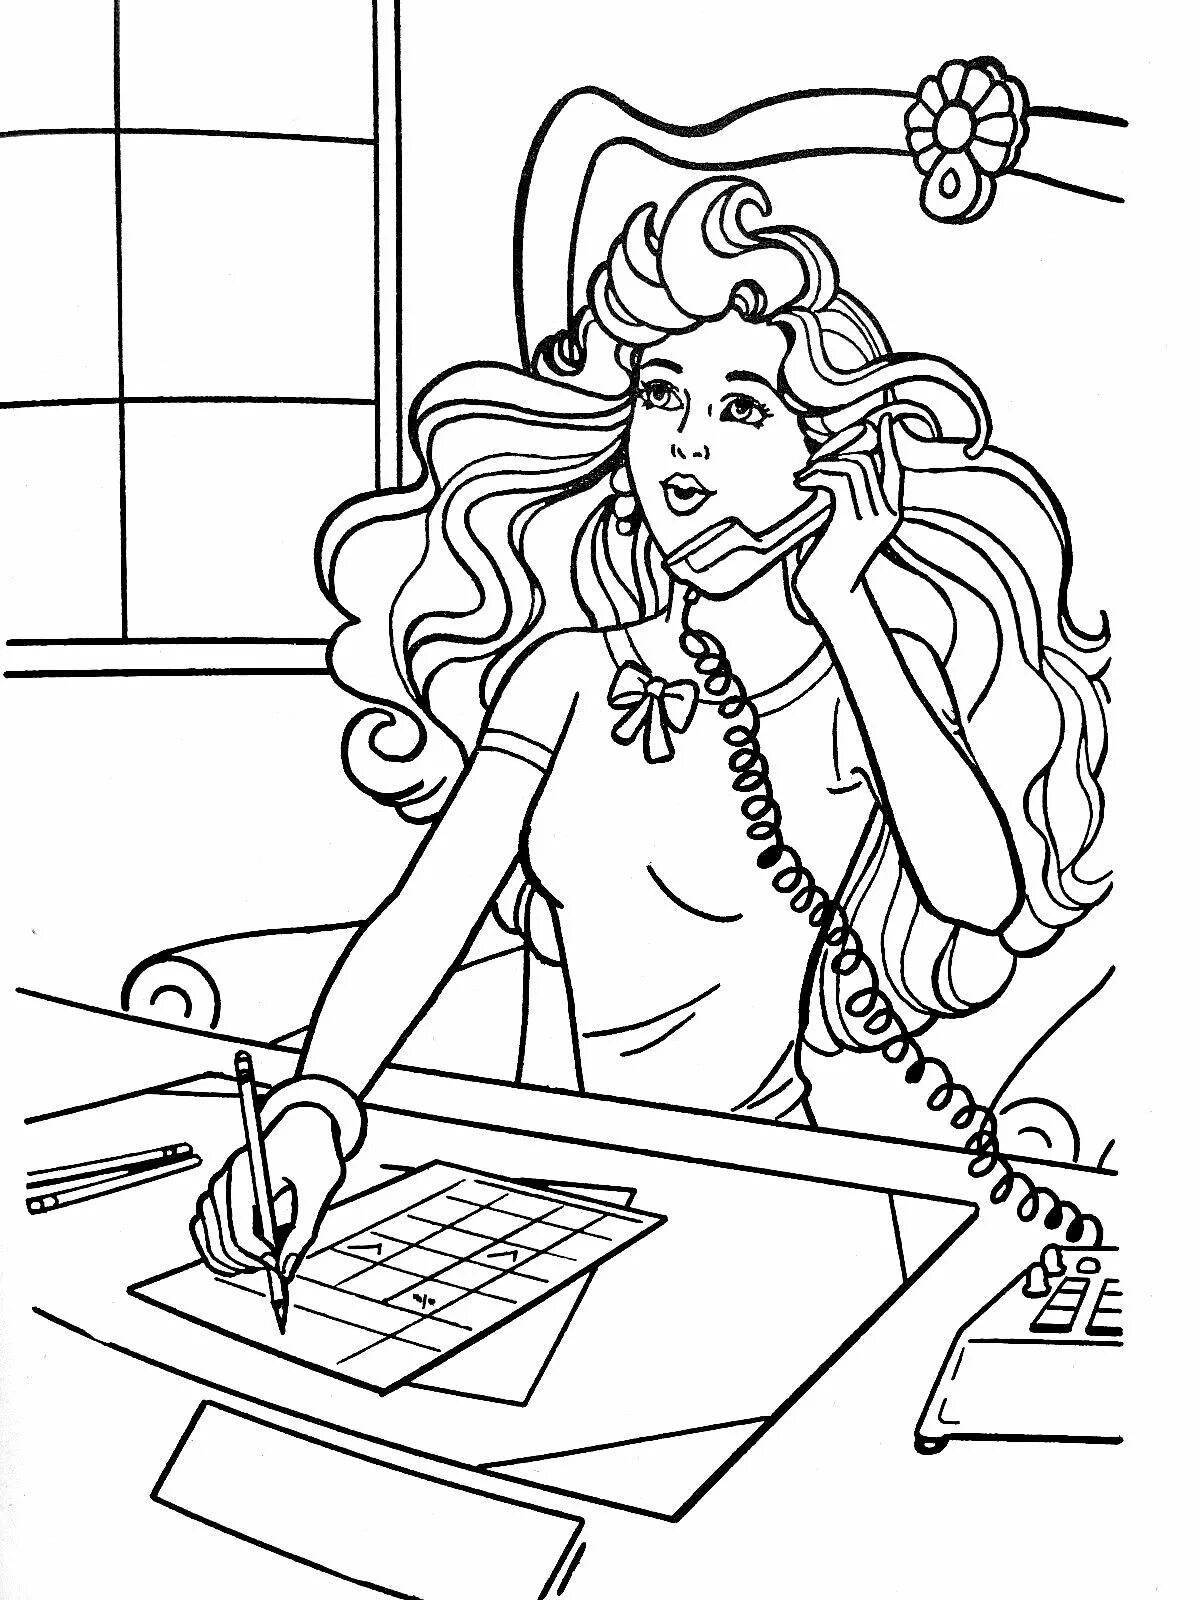 Coloring page living lawyer